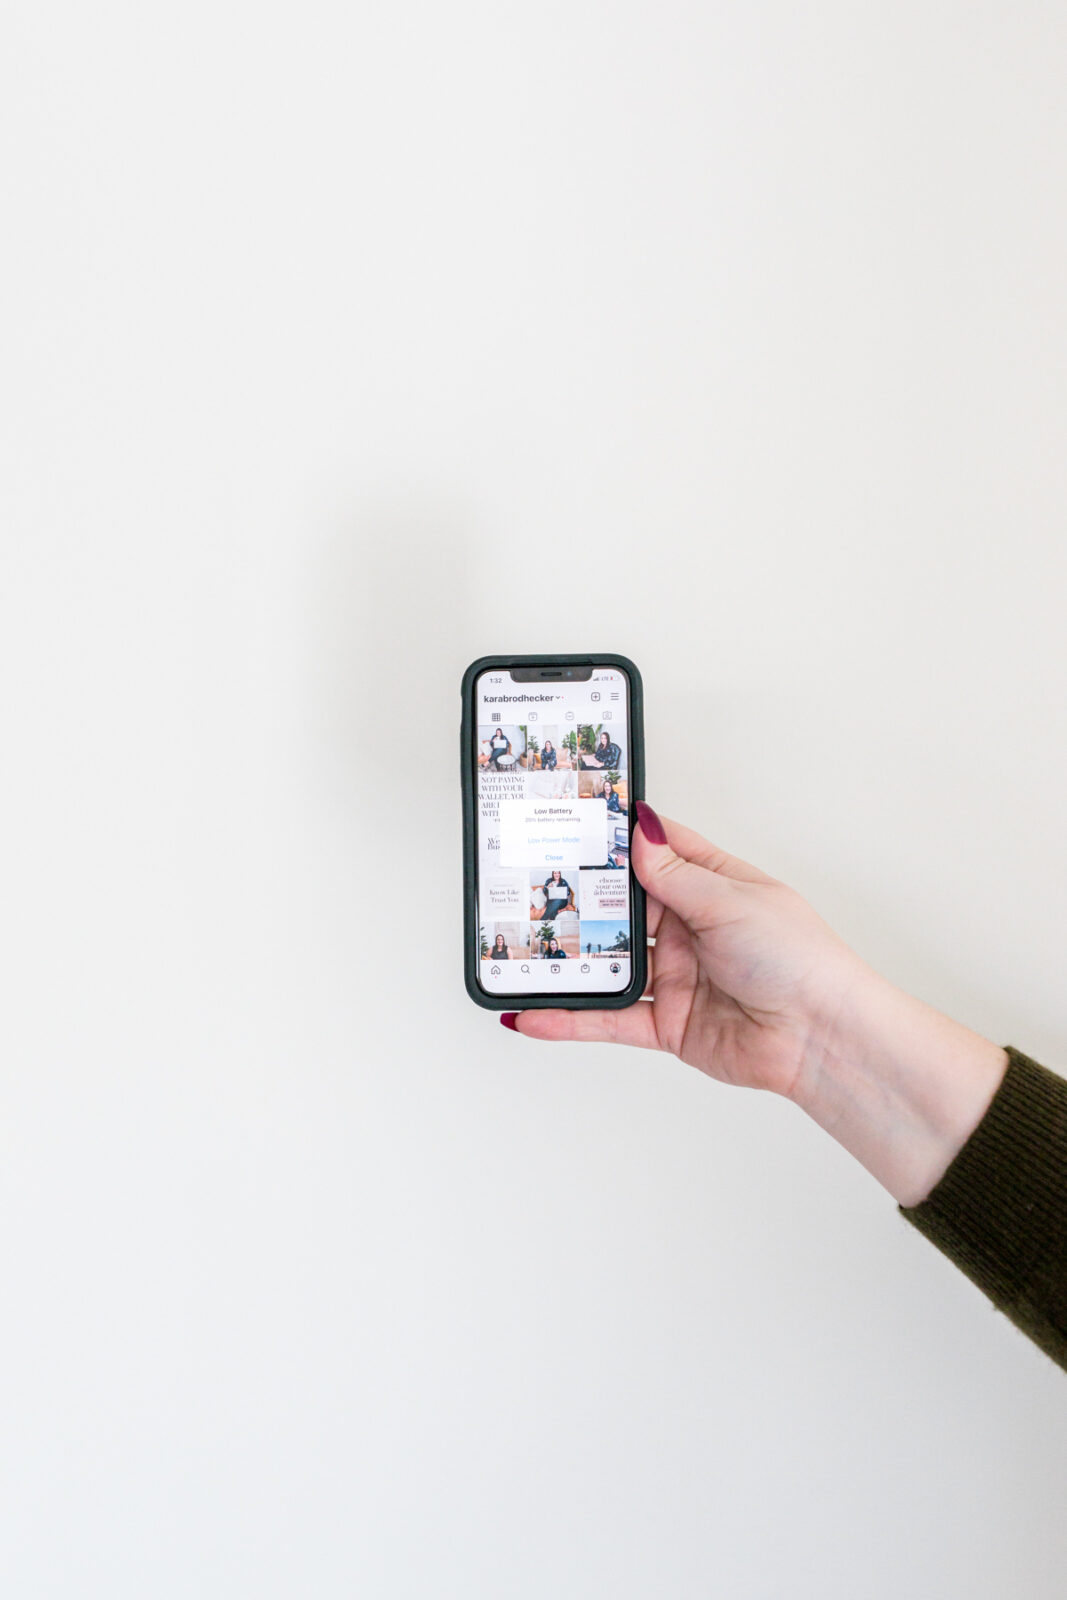 using Instagram as a business owner and millennial personal brand